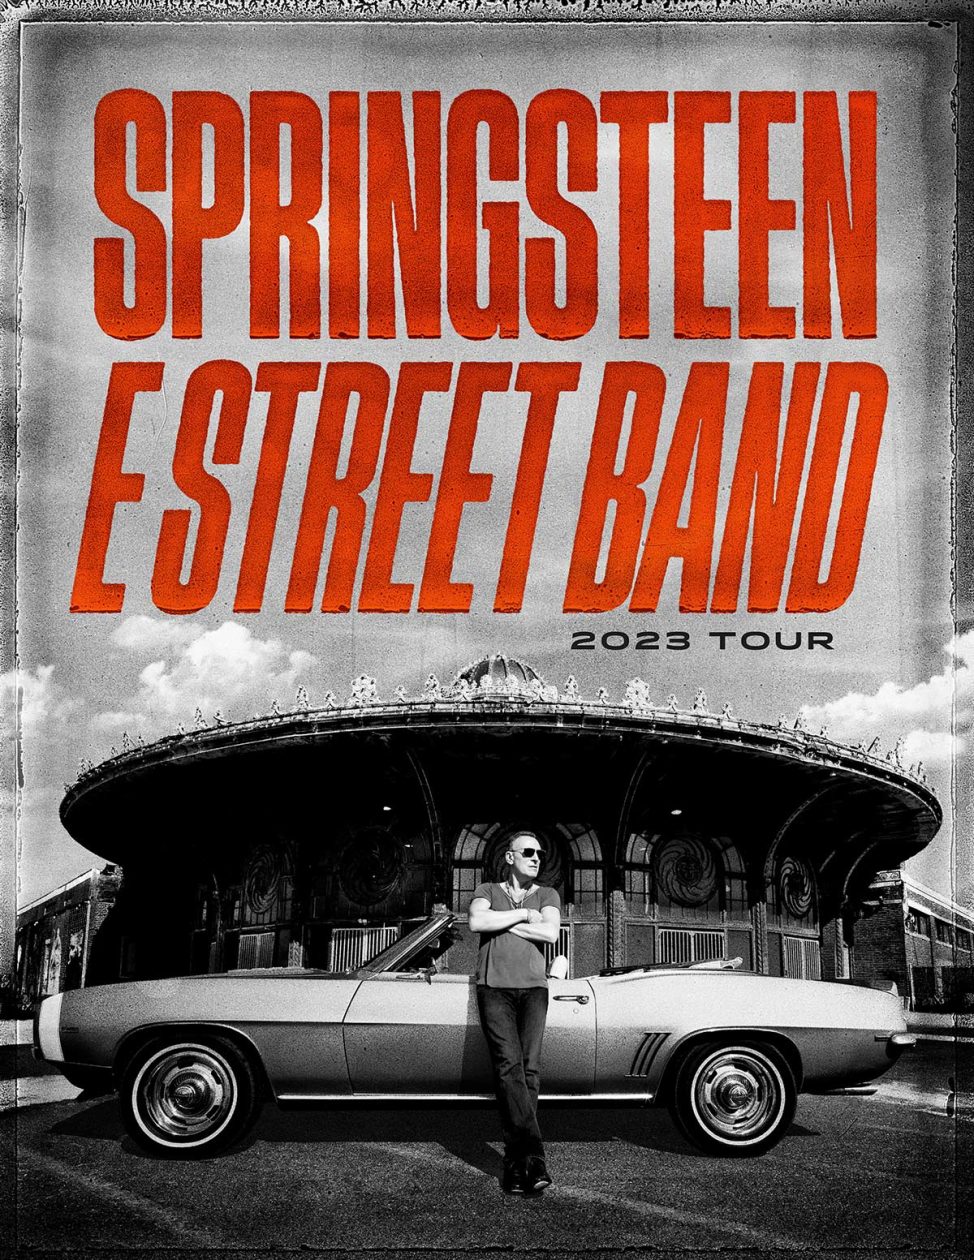 Bruce Springsteen & the E Street Band Announce 2023 Arena Tour